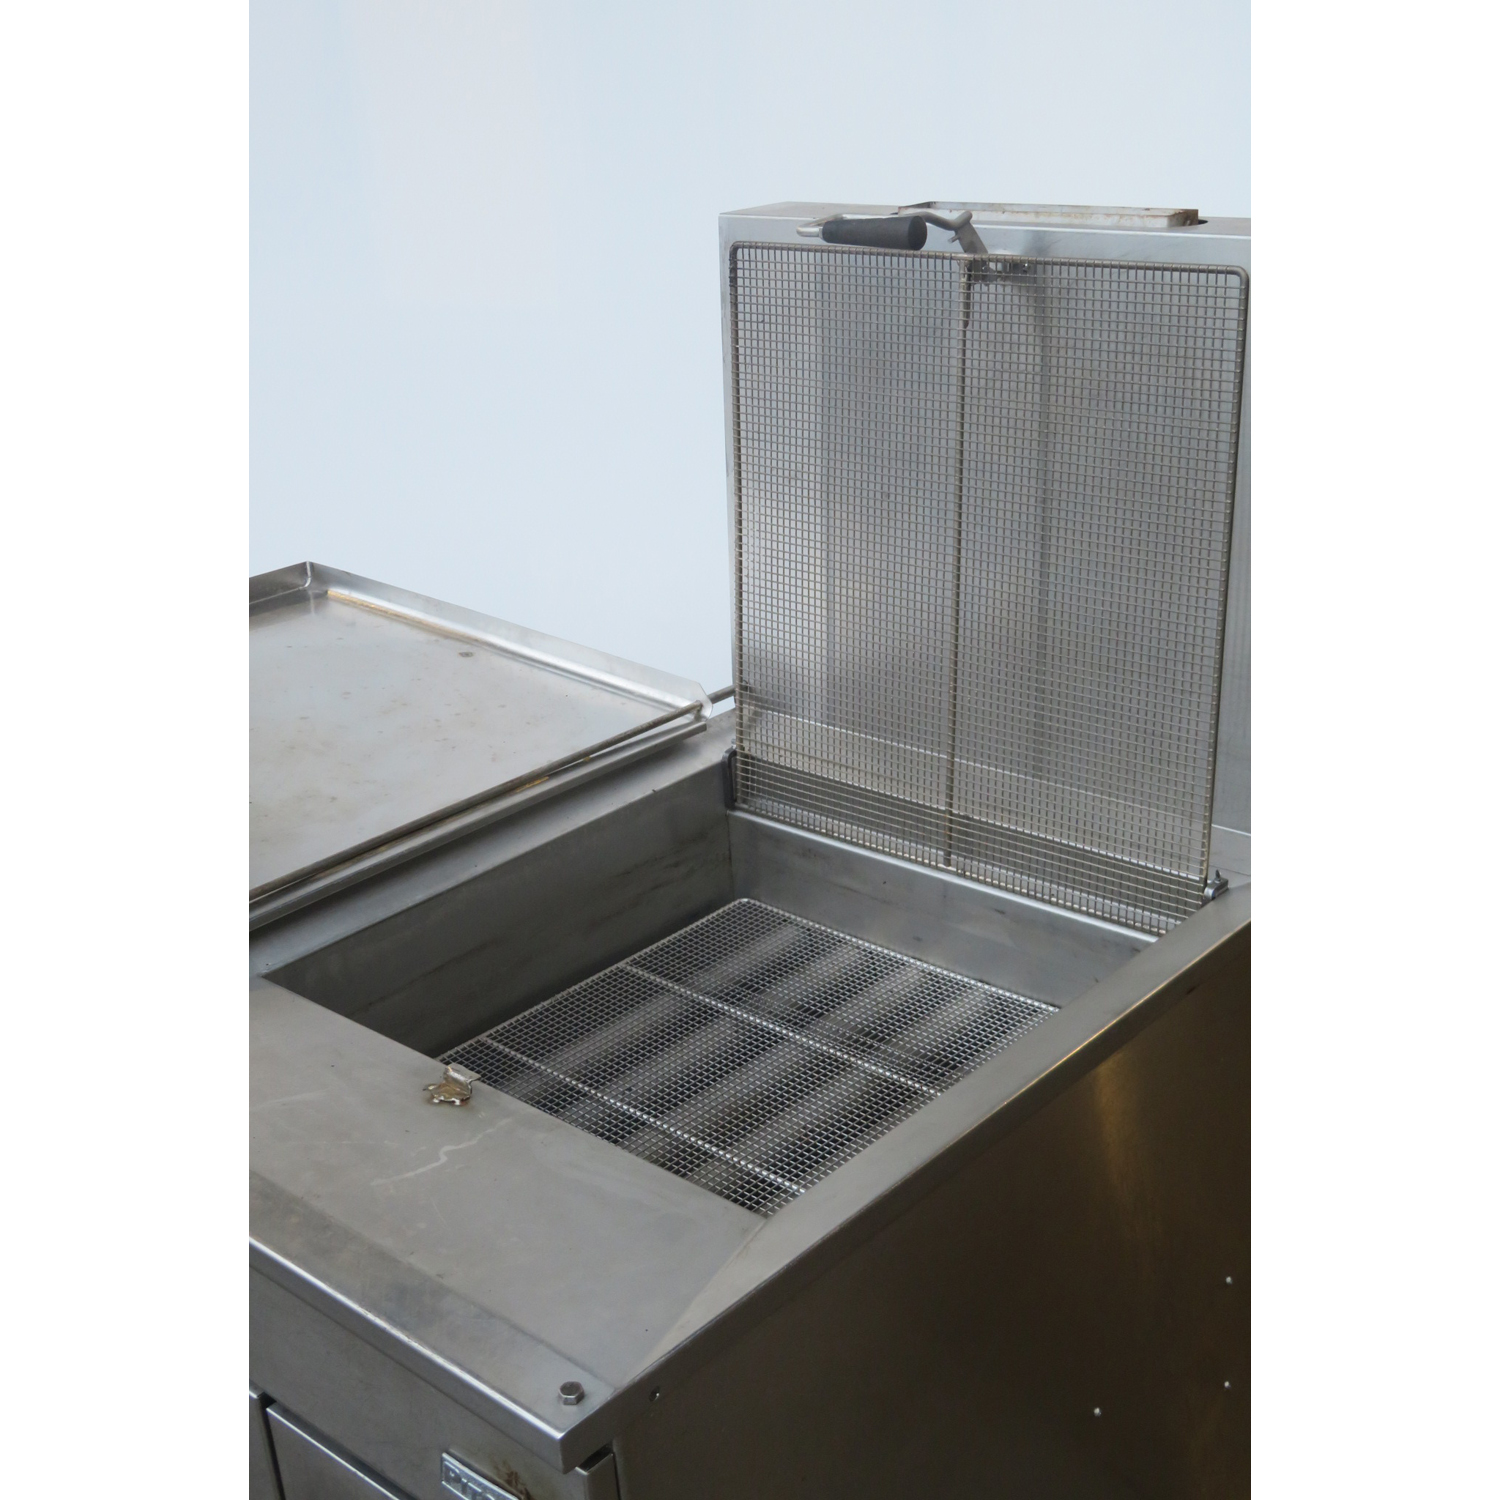 Pitco 24PSS Donut Fryer, Used Great Condition image 2